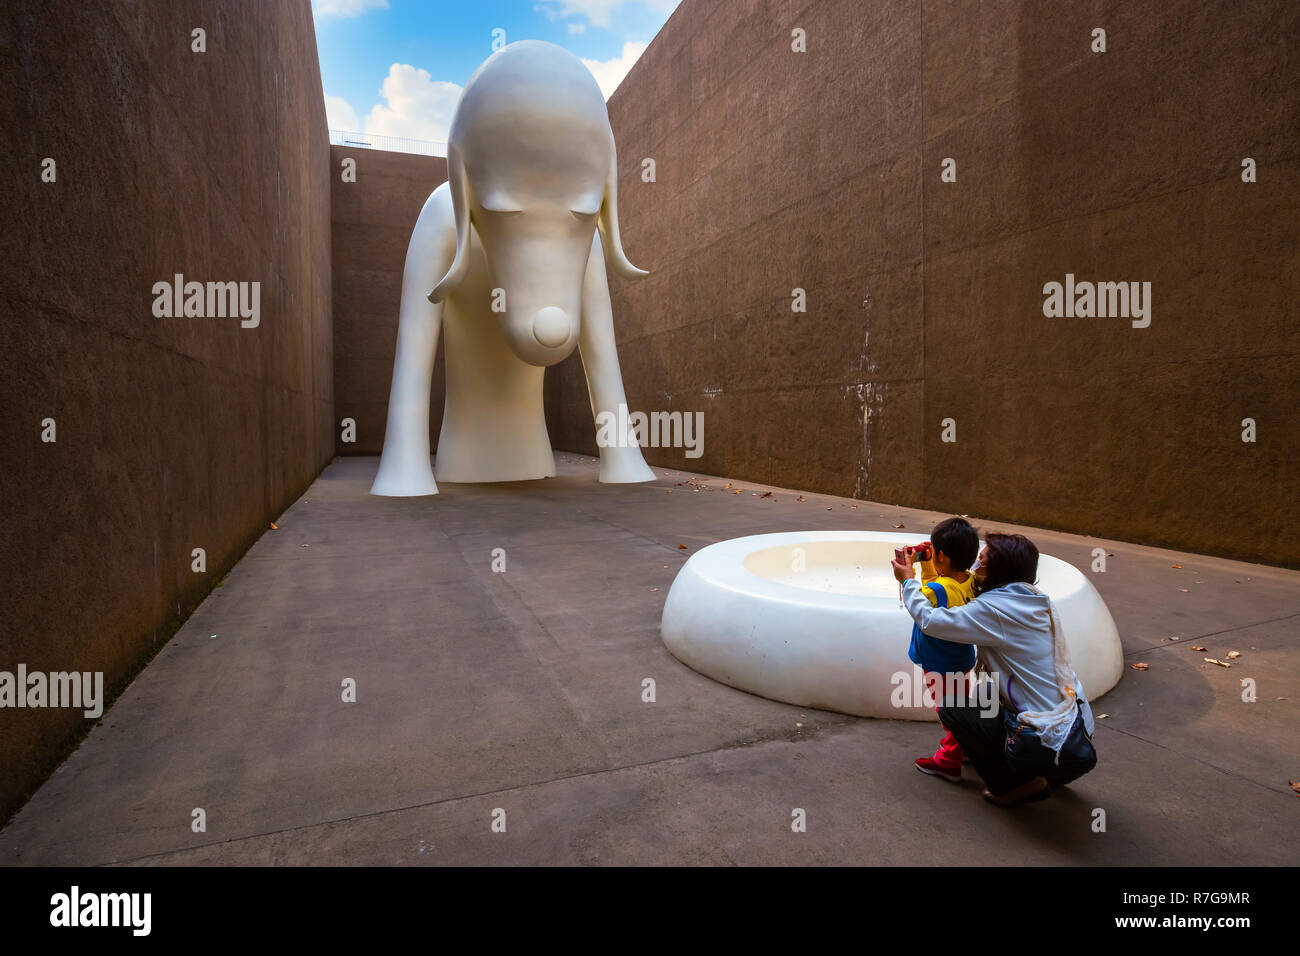 Tokyo, Japan - April 22 2018:  Aomori Dog Statue a gigantic white dog over 8.5 meters tall at The Aomori Museum Stock Photo